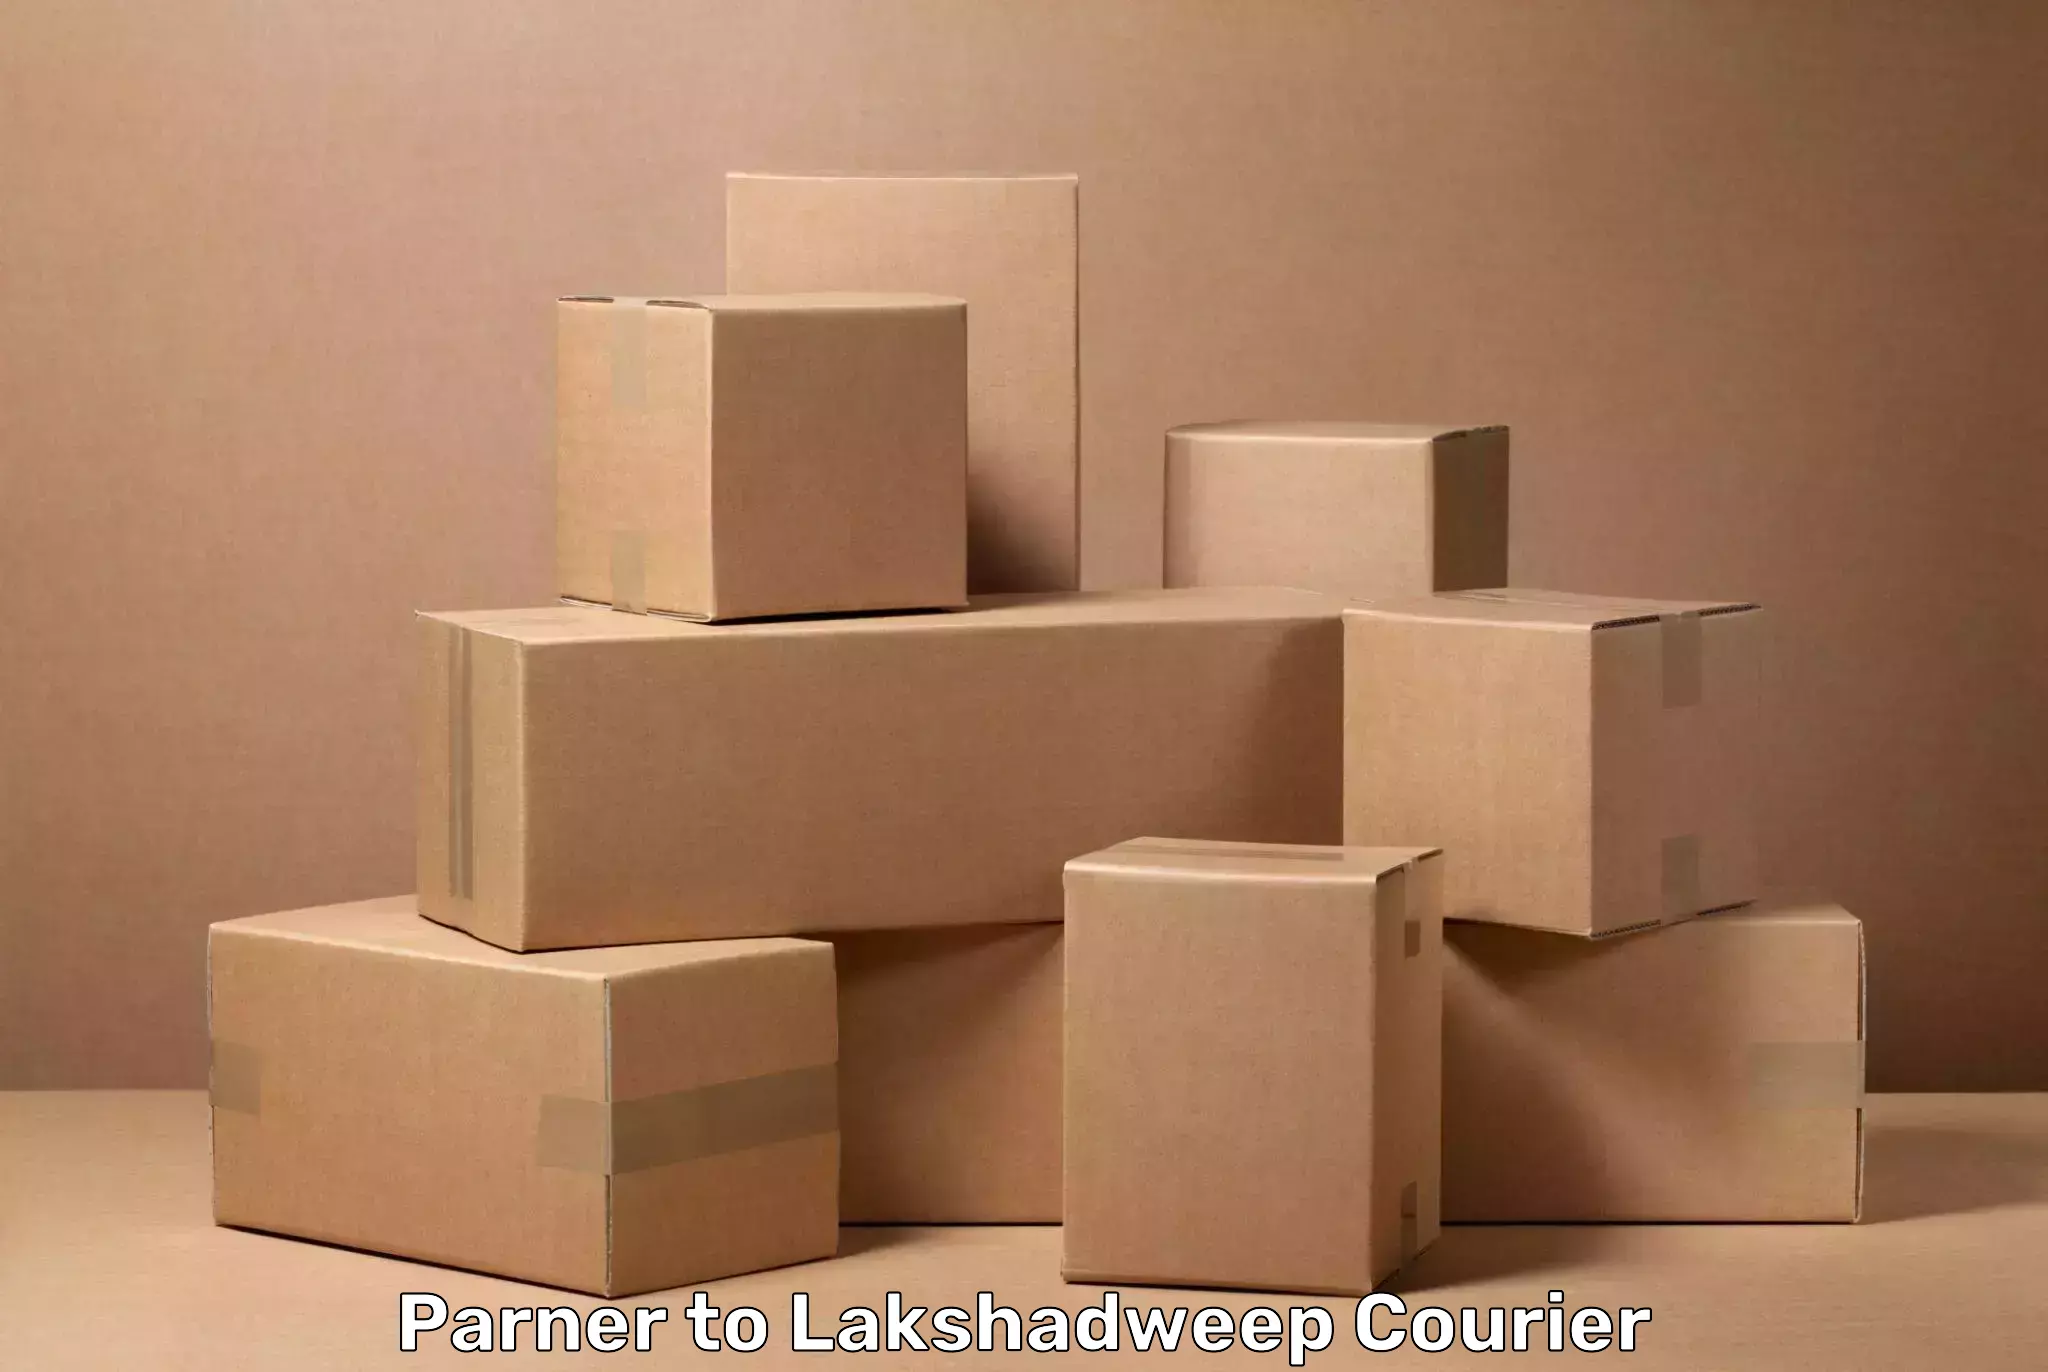 Quick luggage shipment in Parner to Lakshadweep